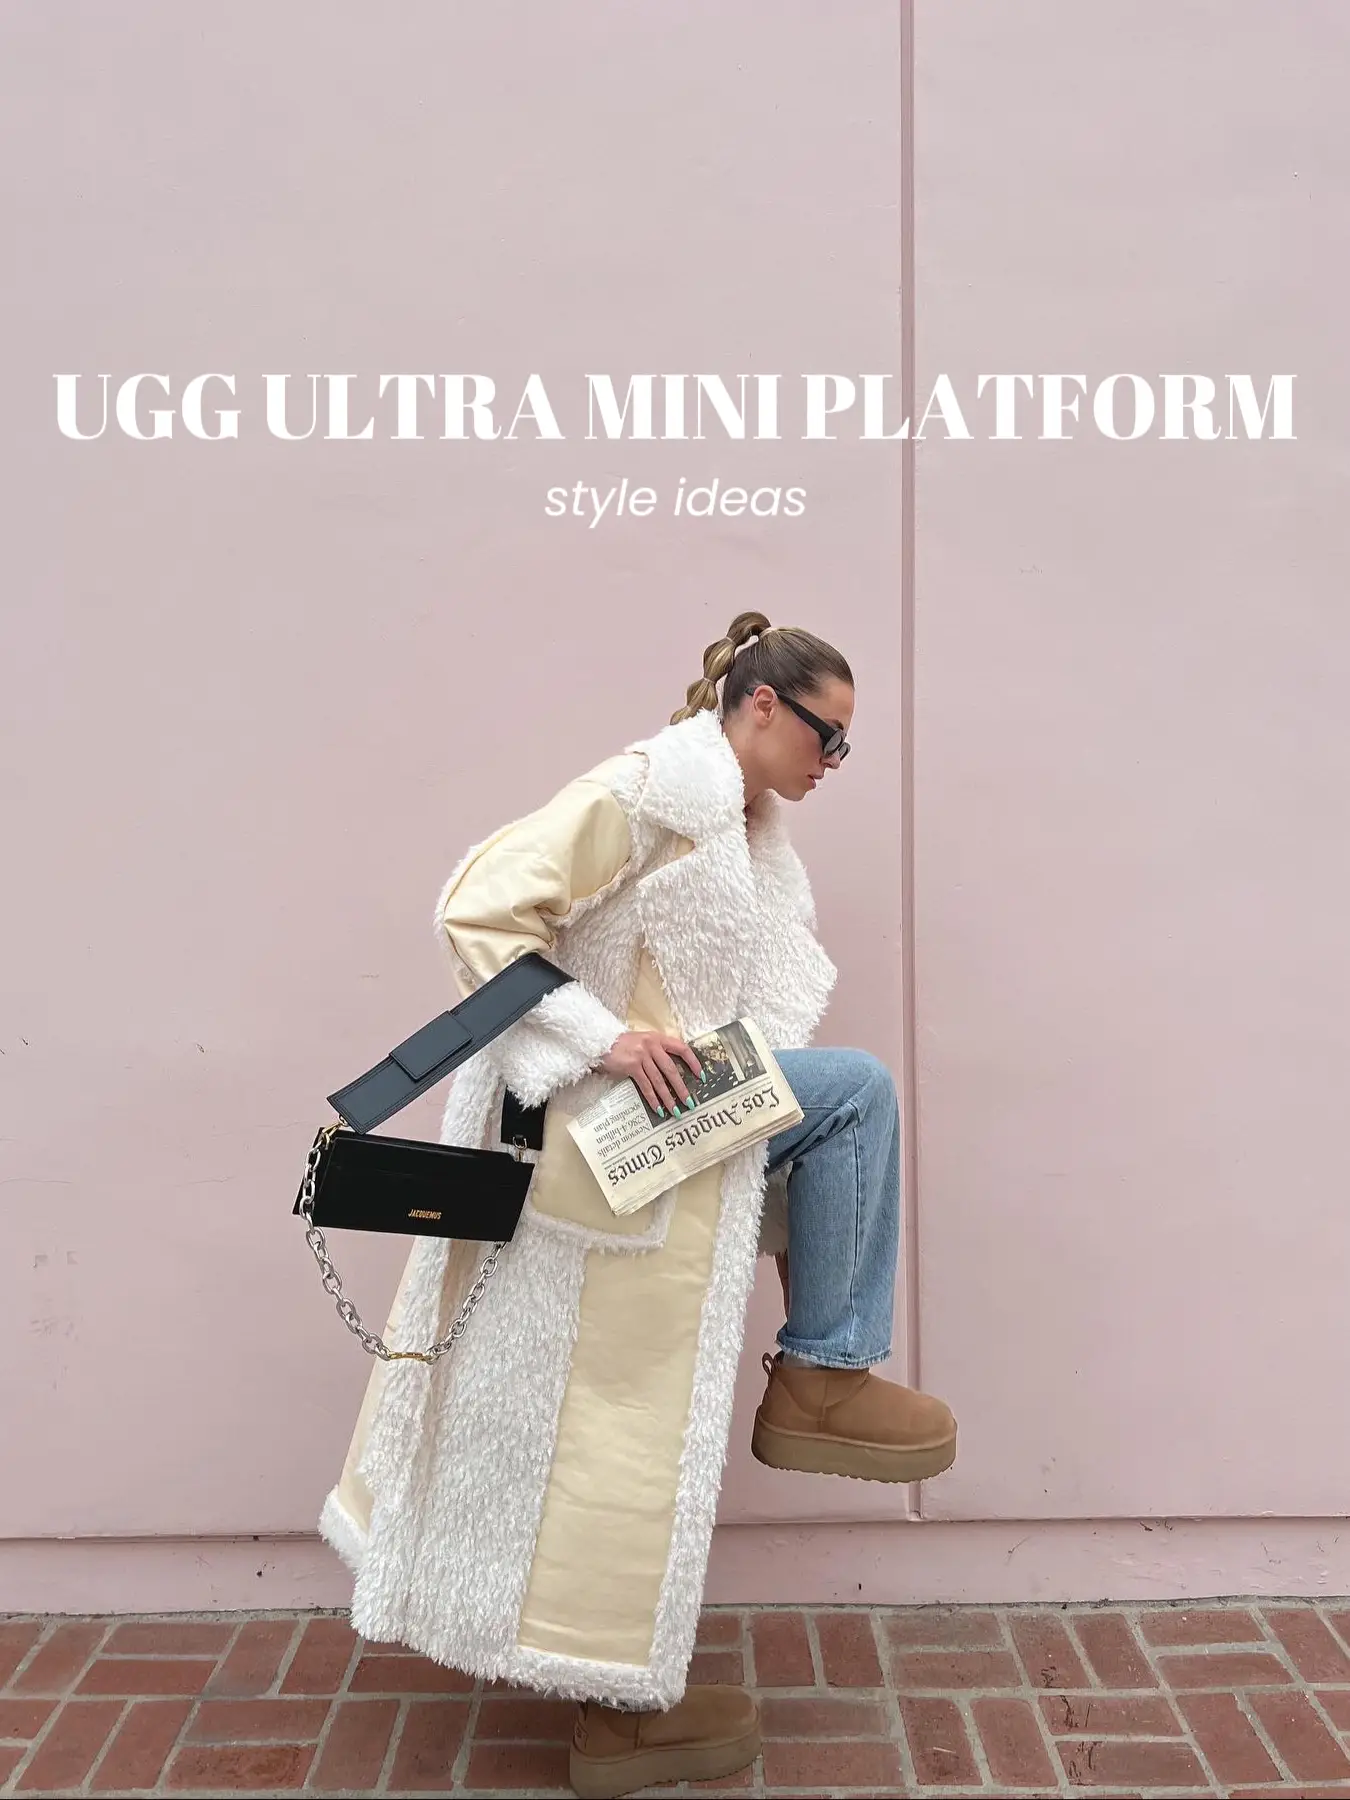 Comfy and Stylish UGG Boots Ideas for Winter - Fancy Ideas about  Hairstyles, Nails, Outfits, and Everything